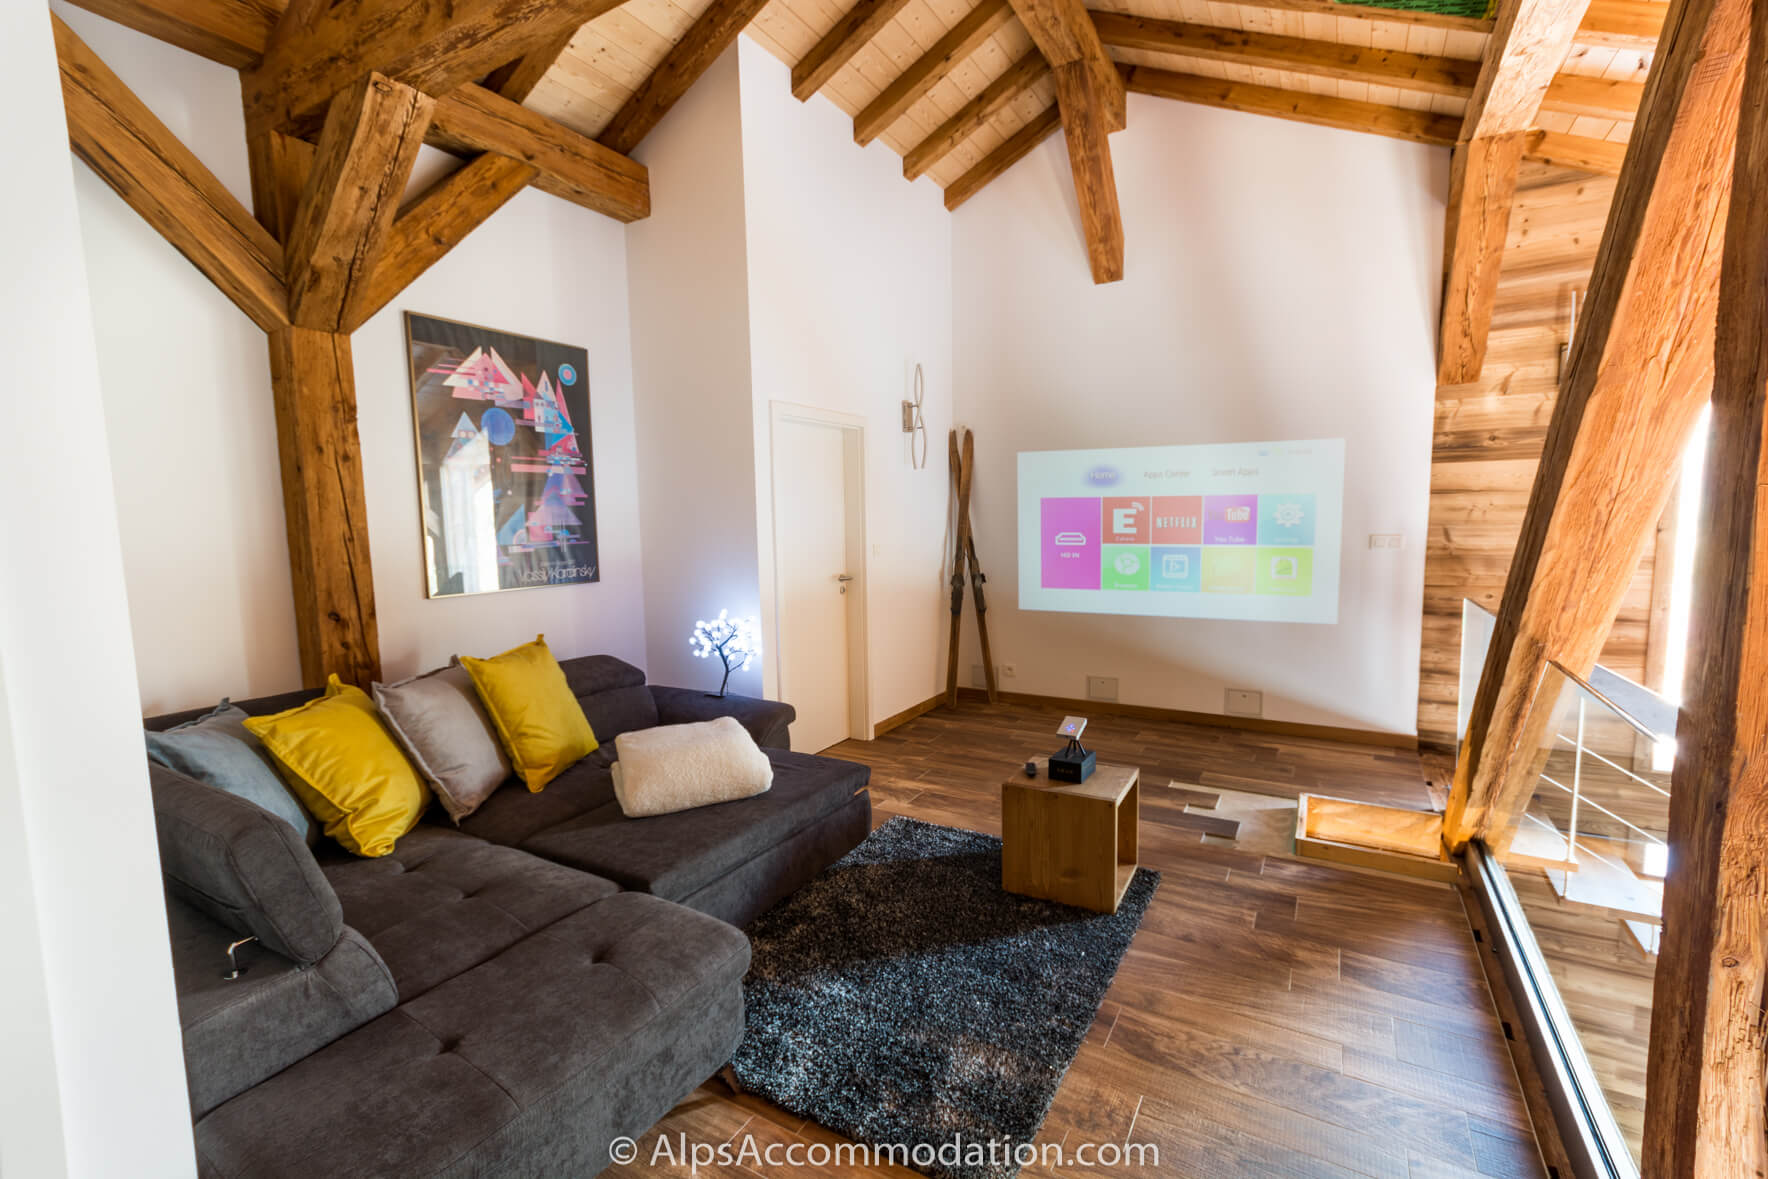 Chalet Sole Mio Morillon - The mezzanine area with comfortable sofa bed and projector